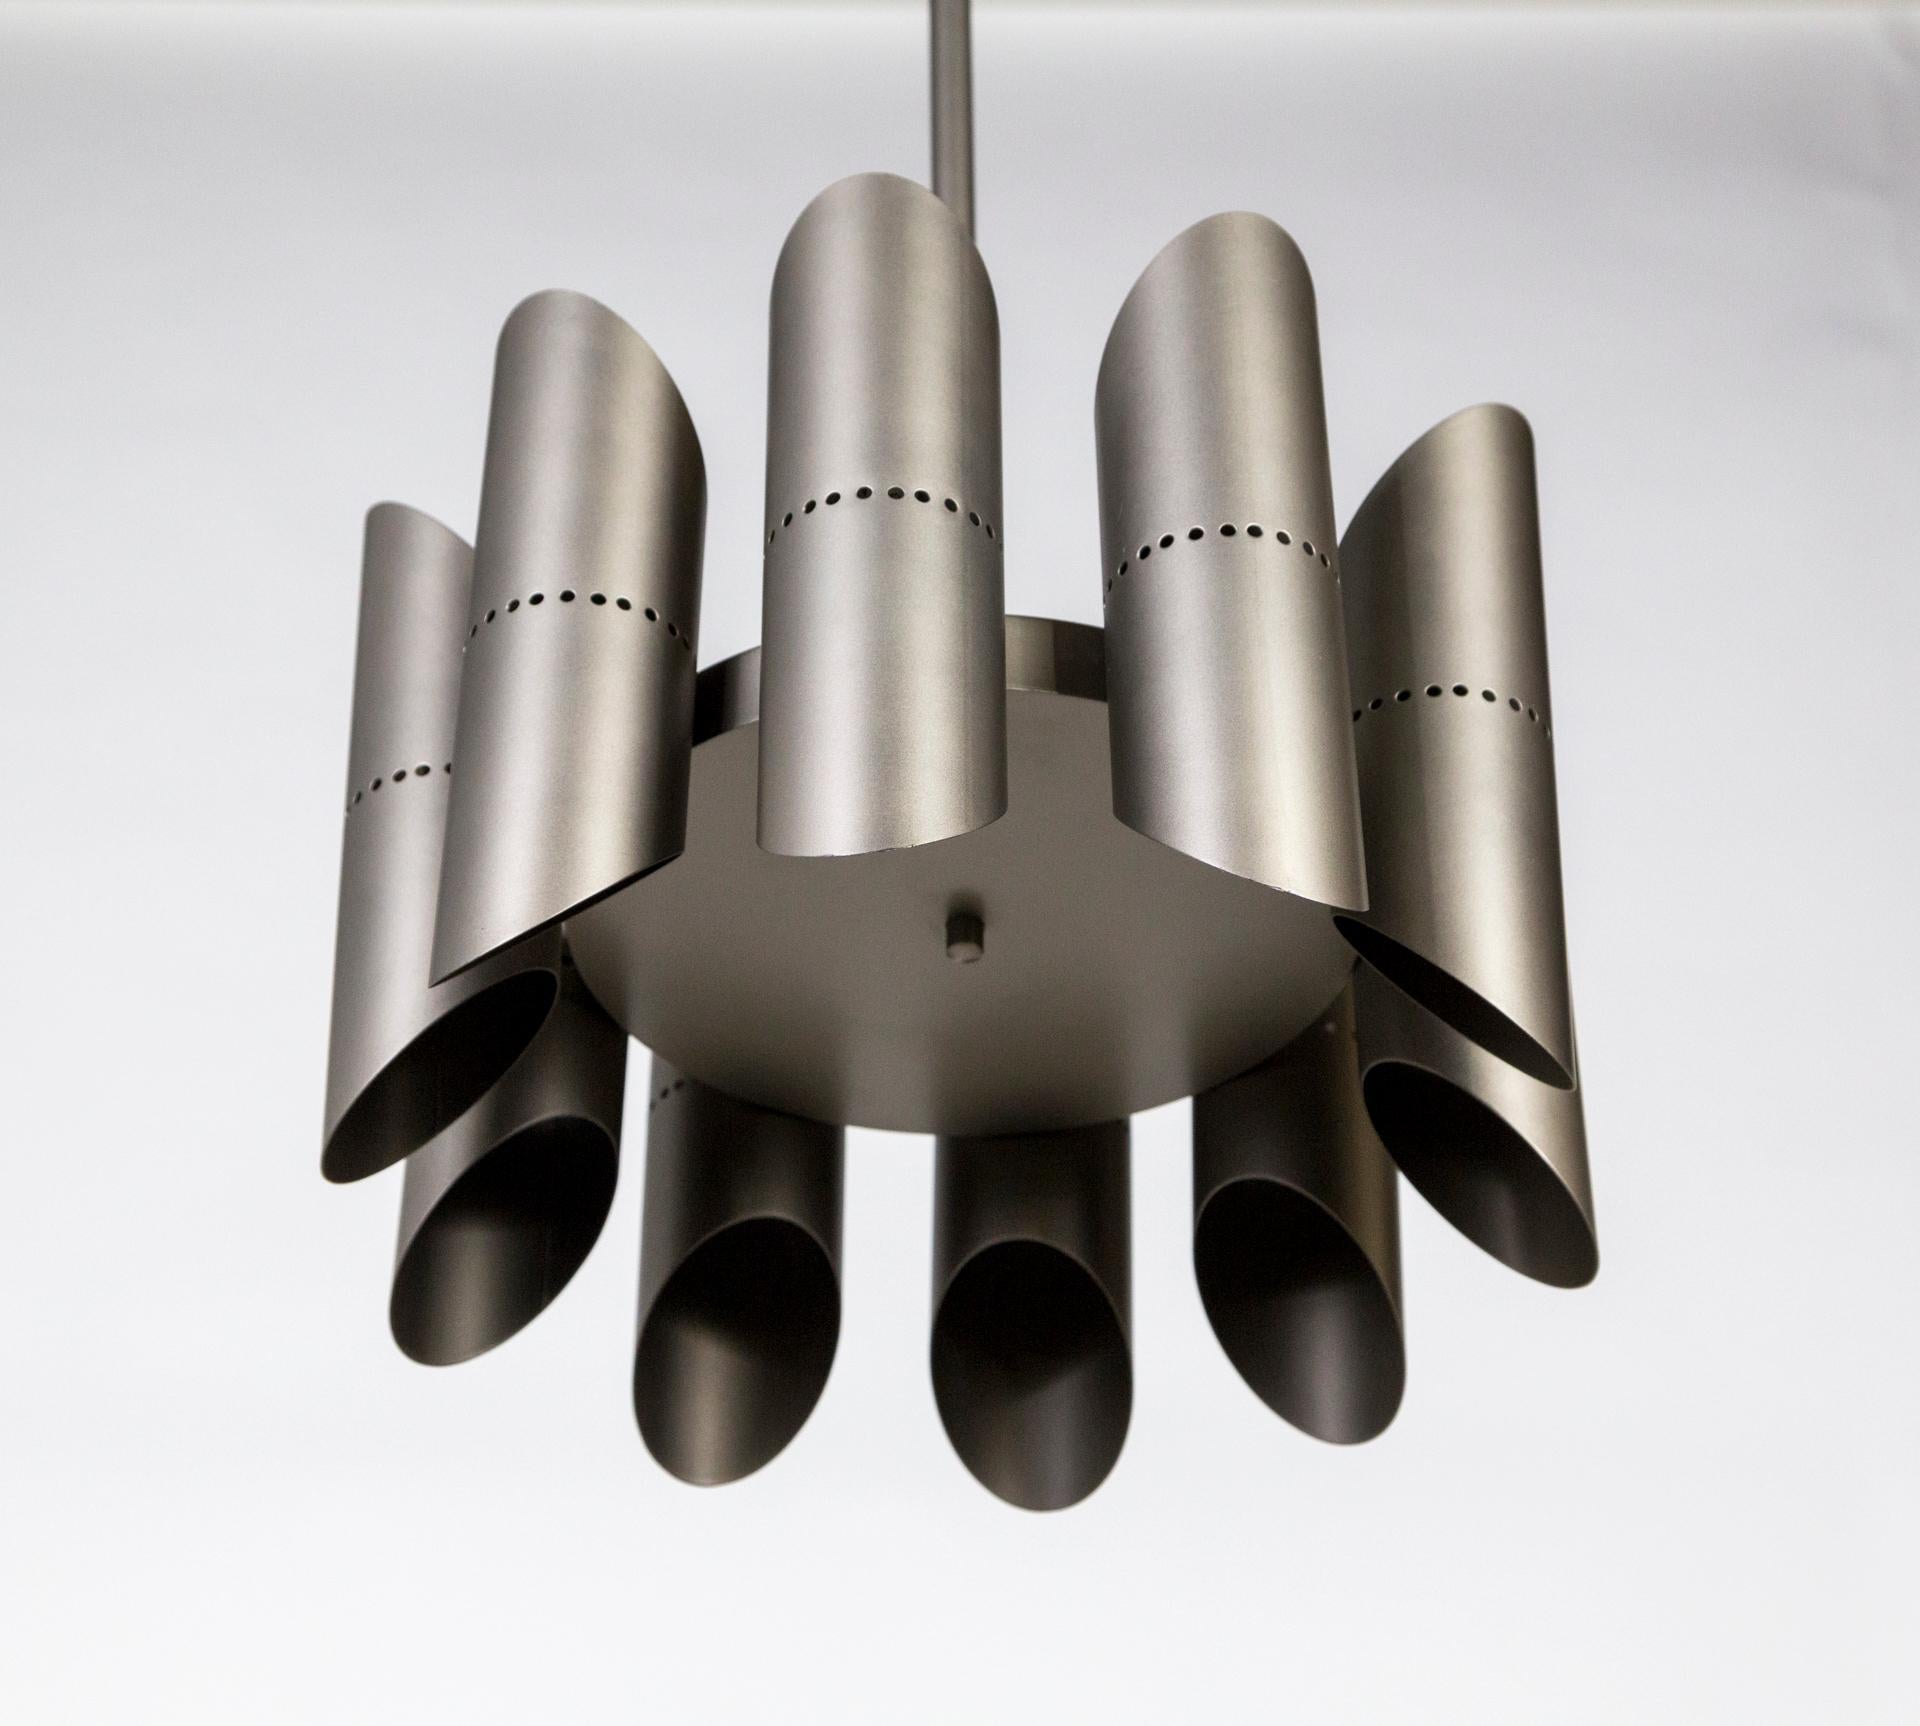 A German pendant light from the 1950s in a sleek design of 10 pipes mounted around a disk. Newly powder coated in antique silver tone. 10 sockets, newly rewired. 16